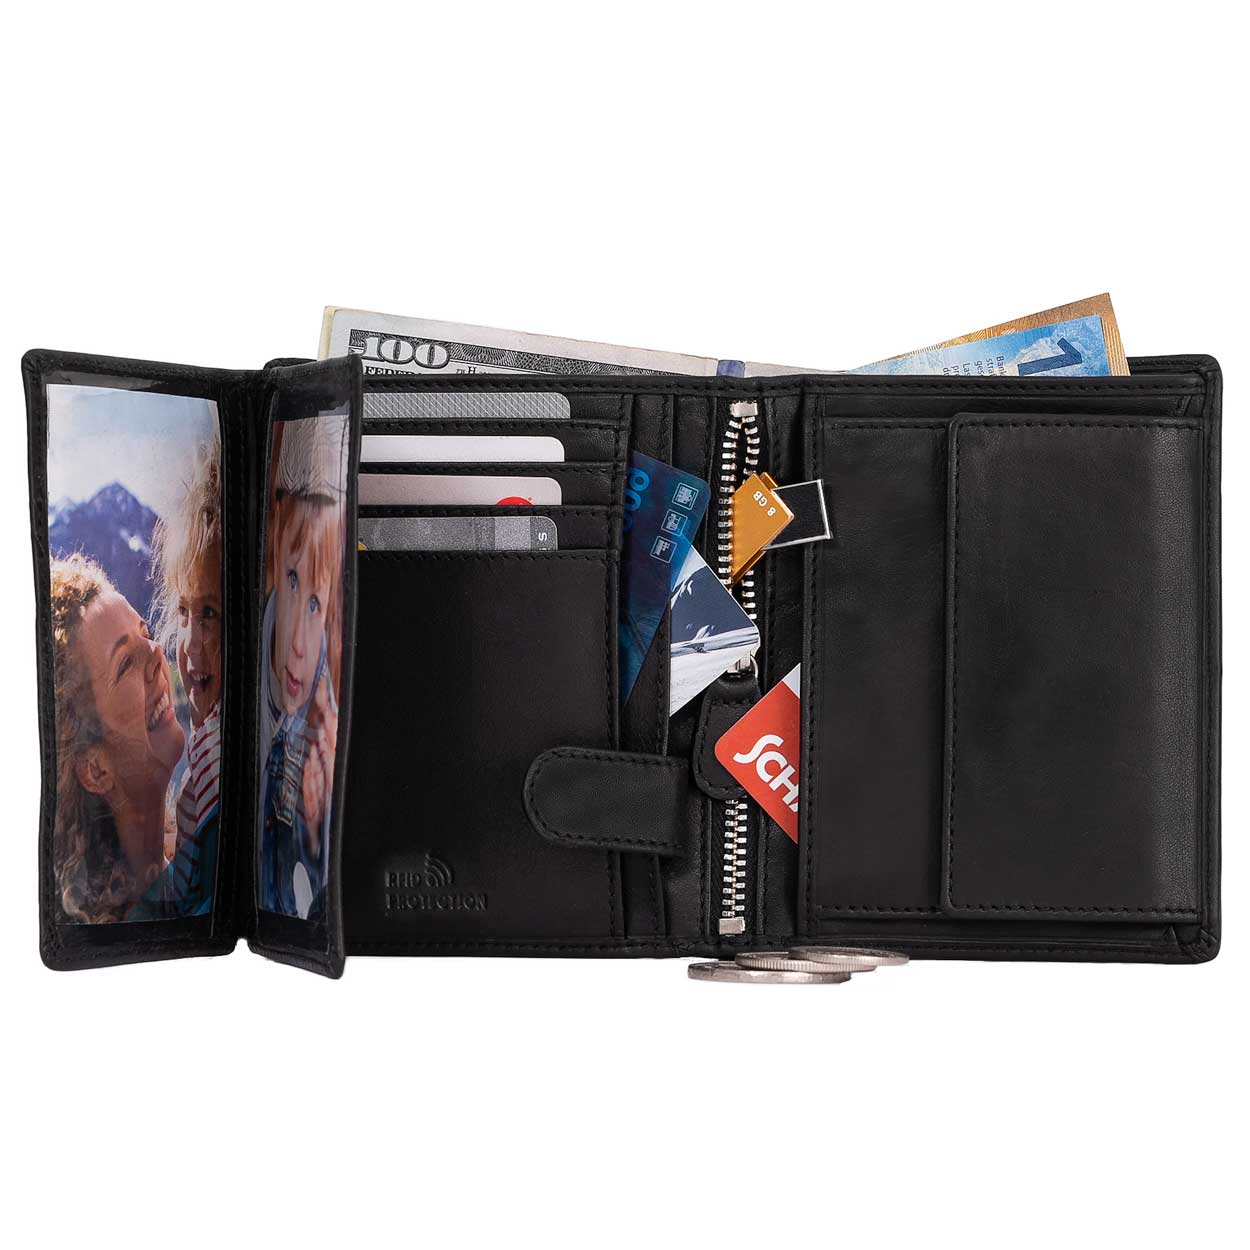 Men's RFID Trifold Leather Wallet